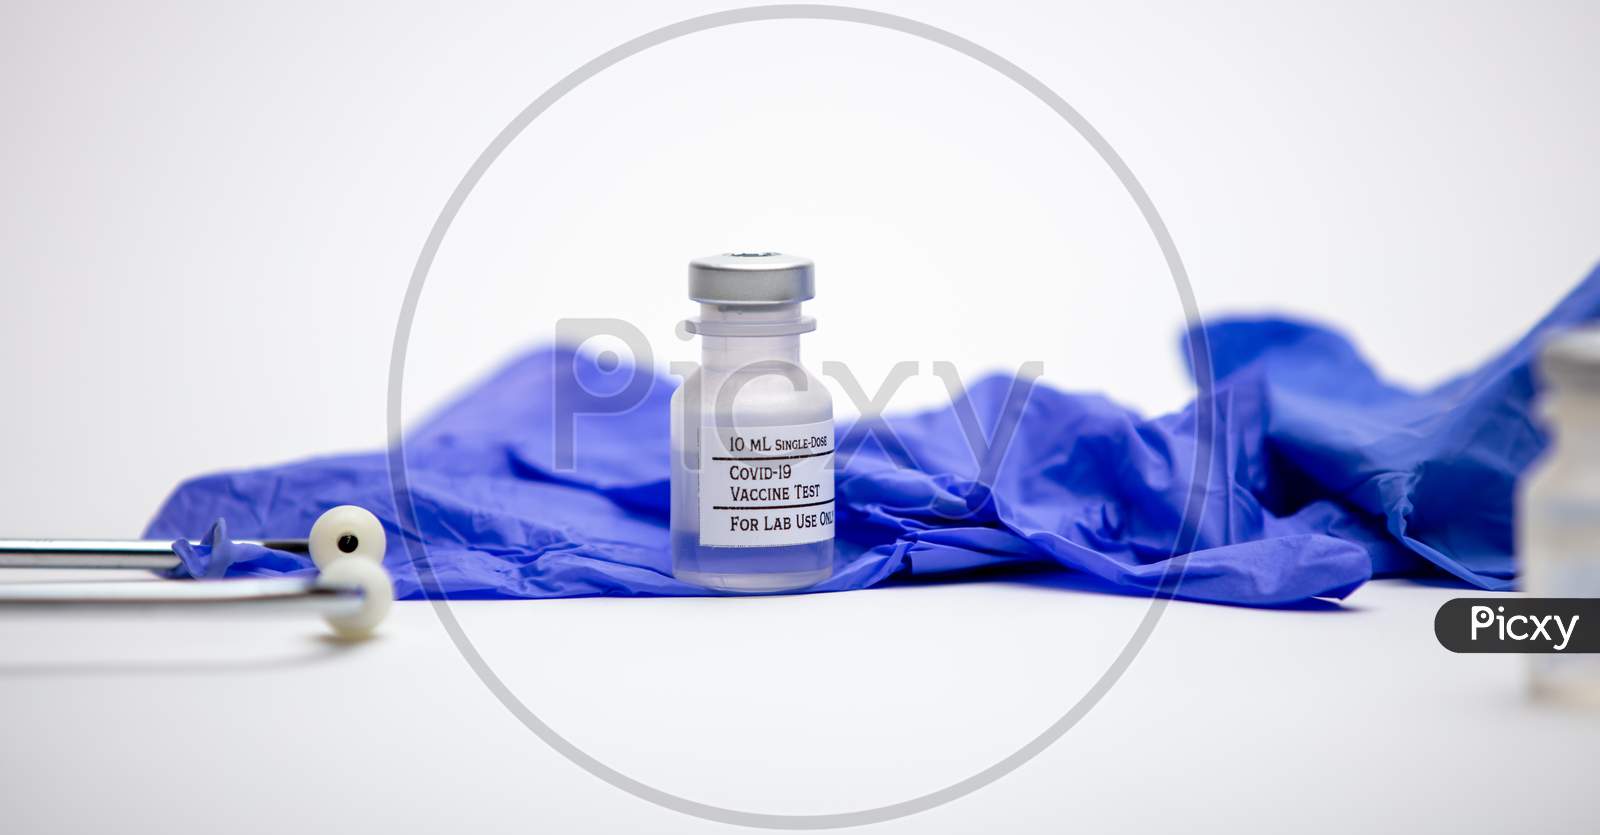 A Vial Of Covid-19 Test Vaccine Sits On Top Of Blue Rubber Medical Gloves. Stethoscope On Side.